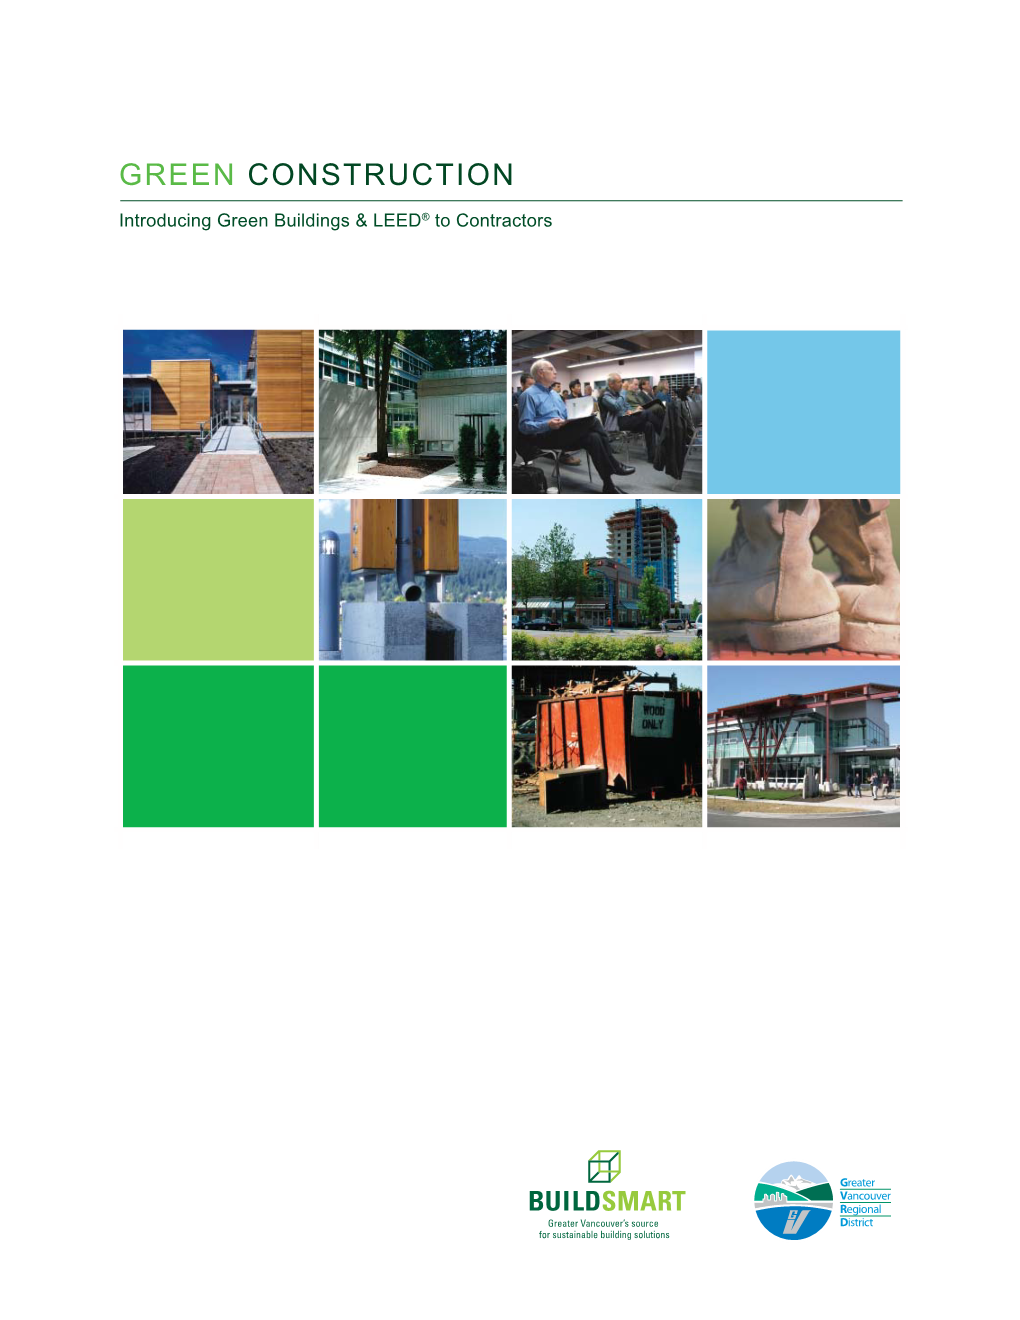 Introducing Green Buildings and LEED to Contractors Guide